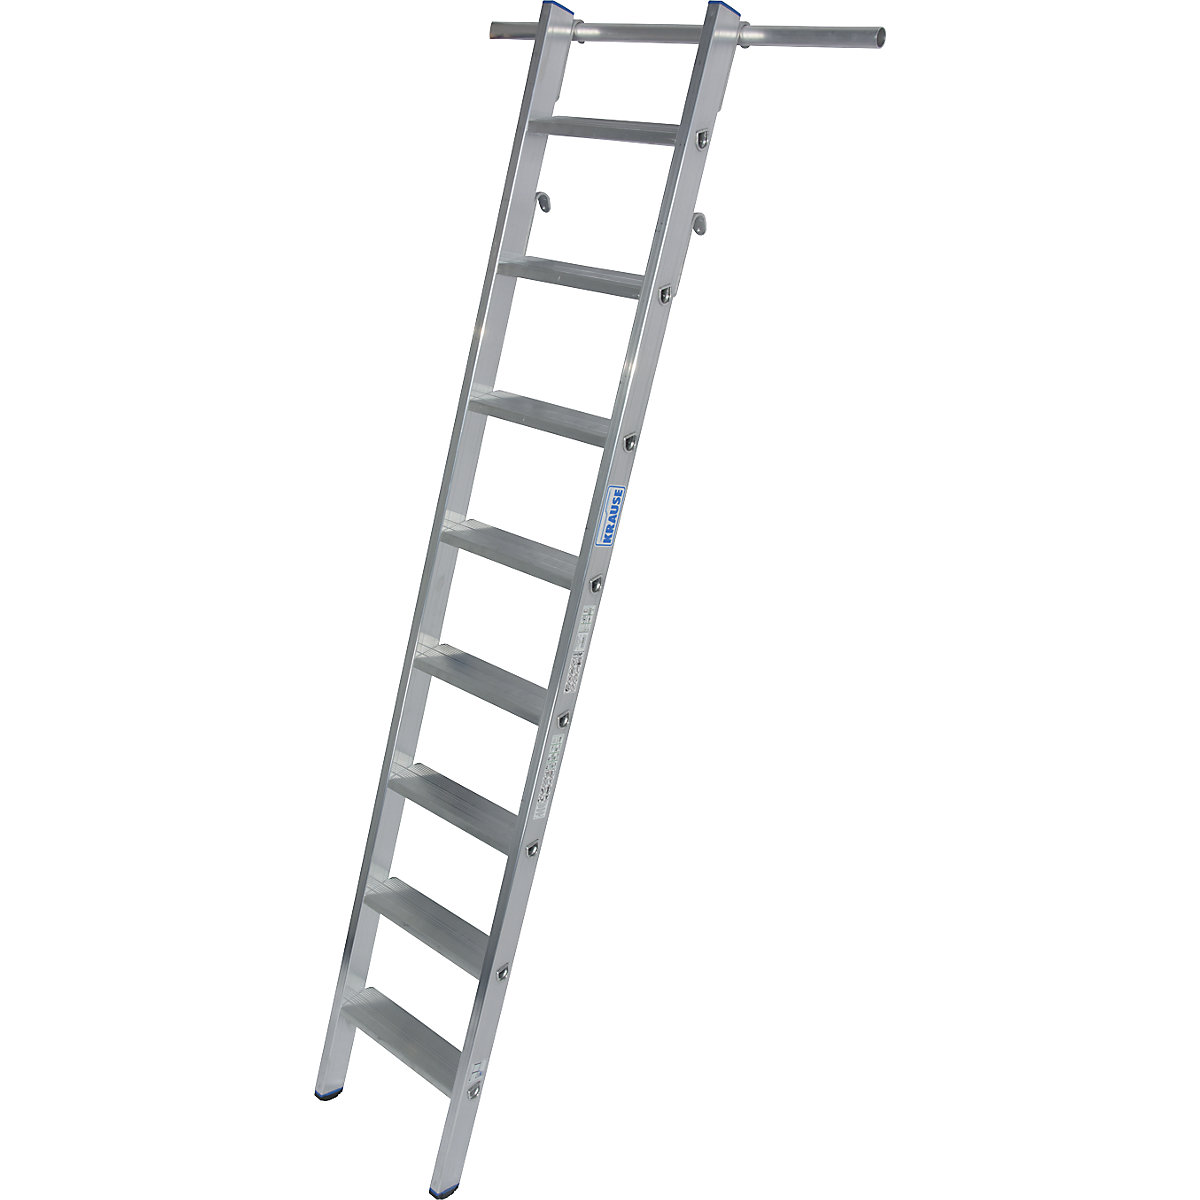 KRAUSE – Step shelf ladder, can be suspended, 2 pairs of suspension hooks, 8 steps